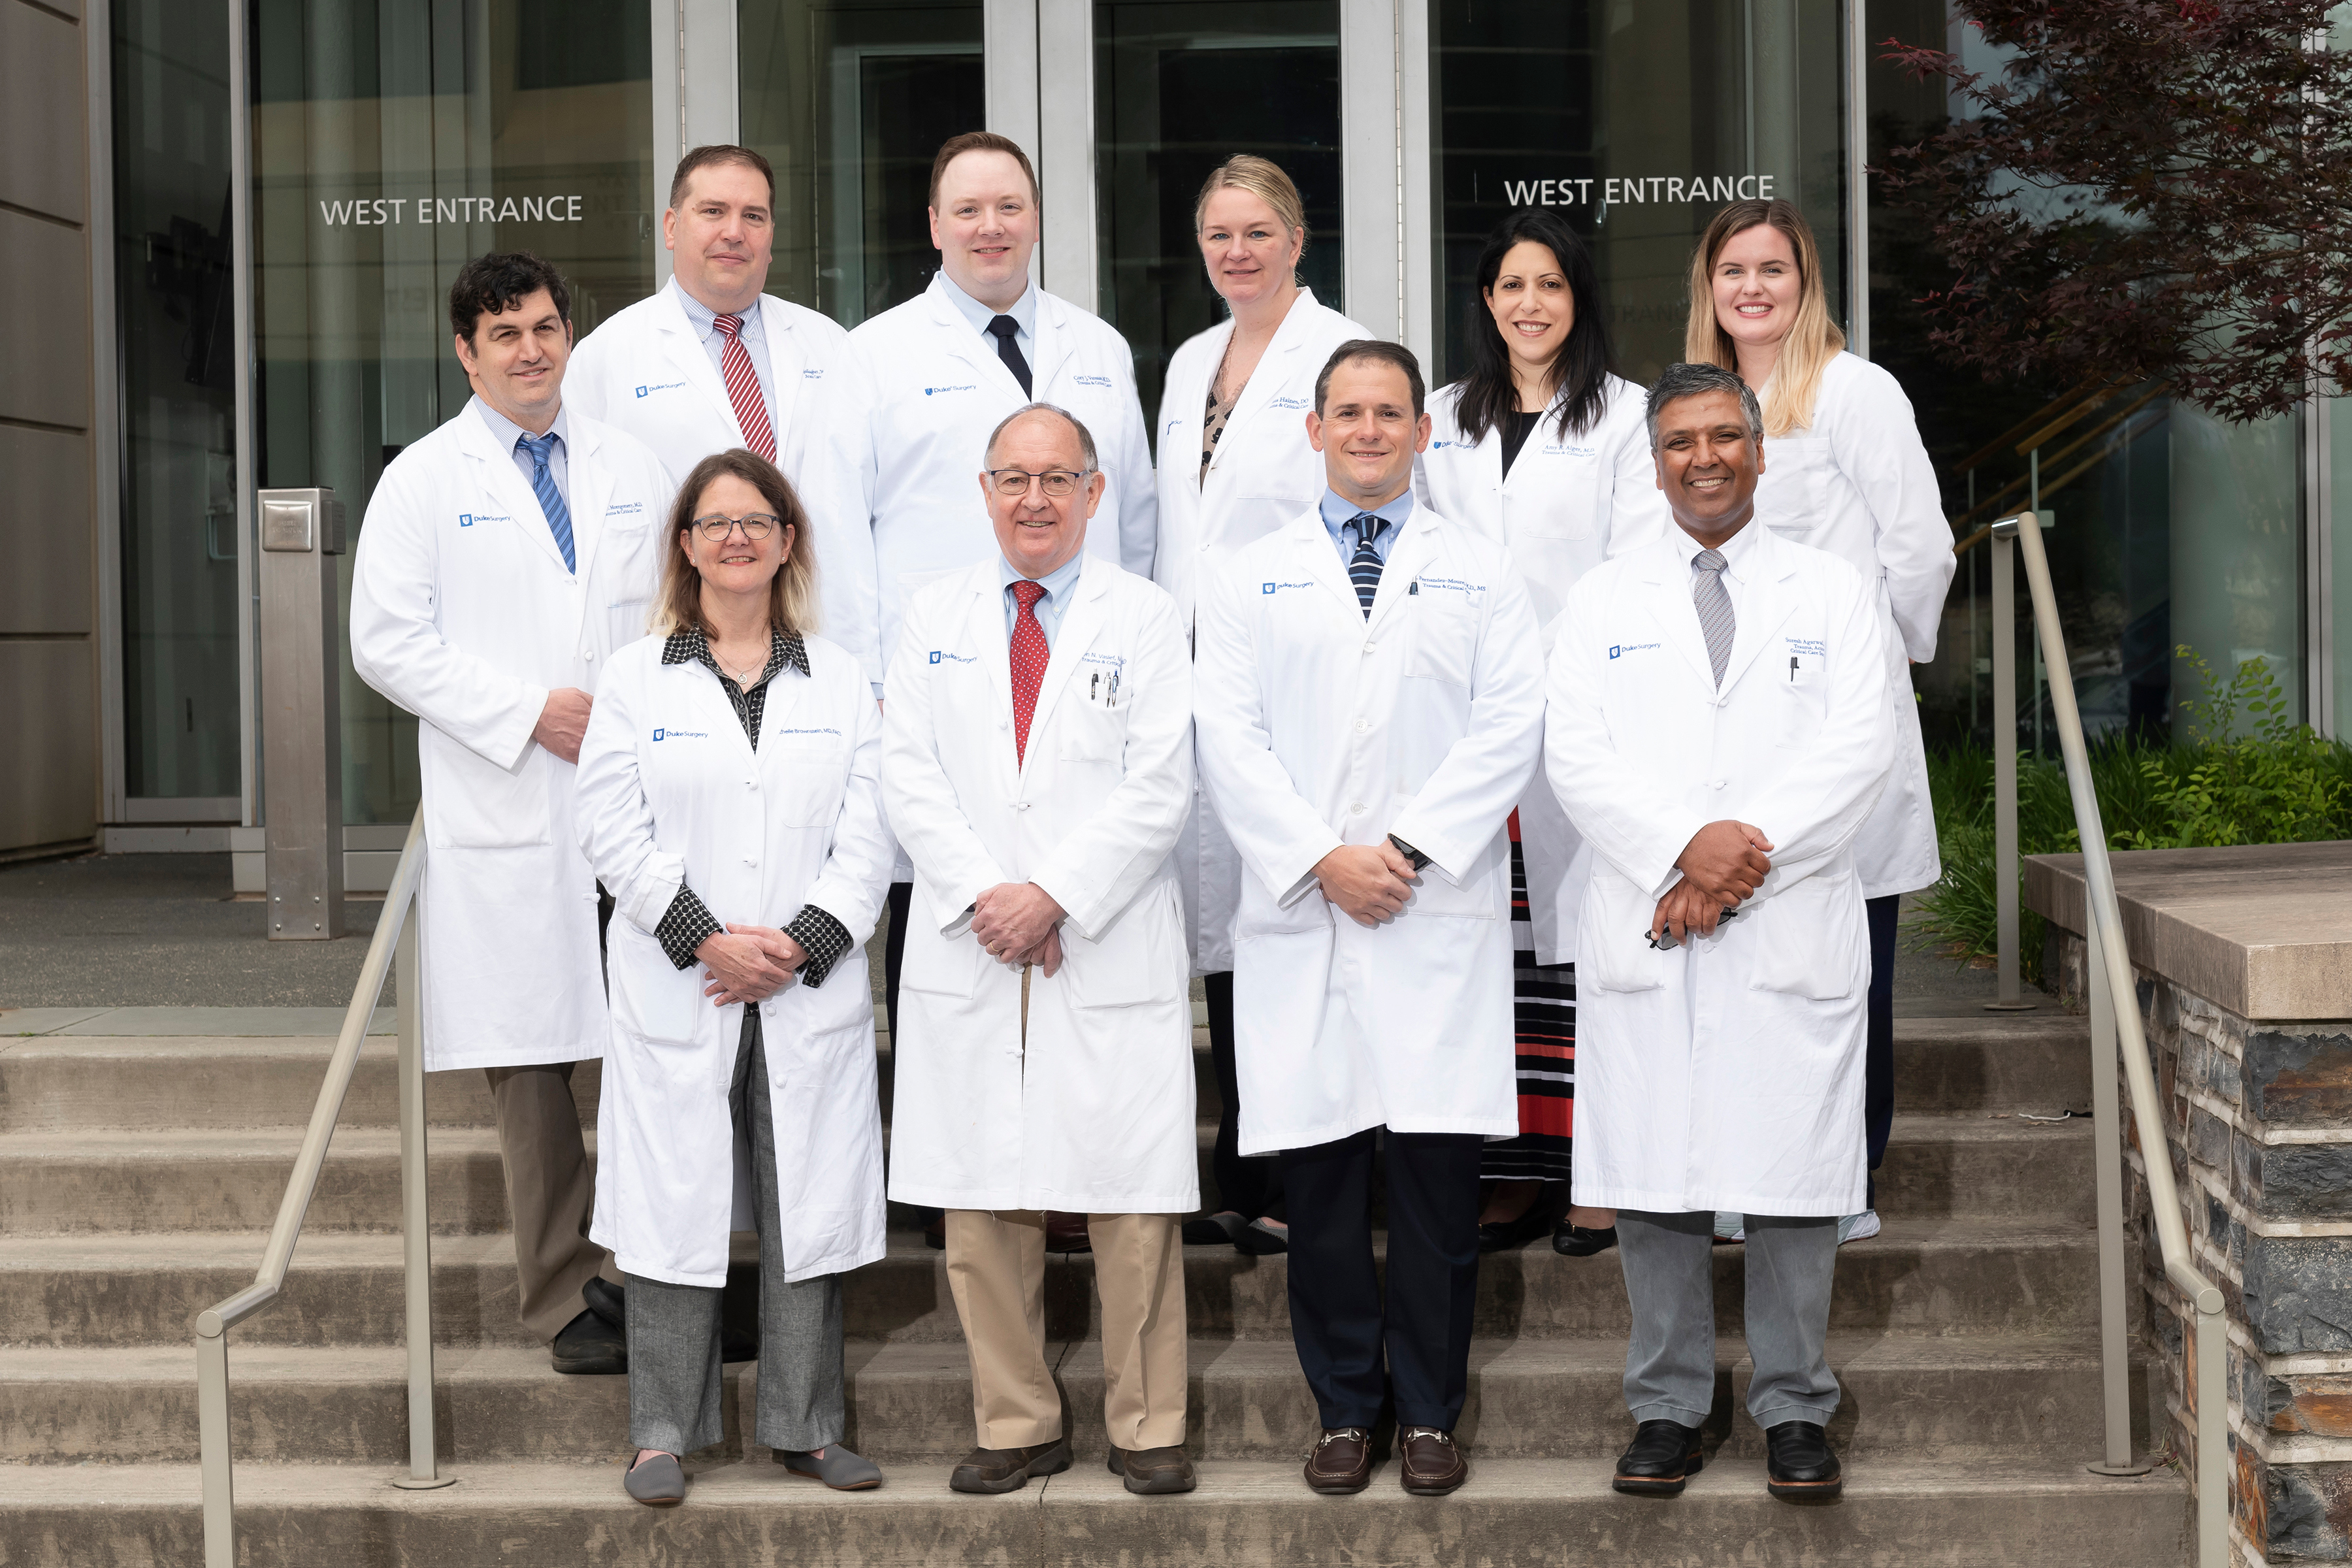 Group photo of Trauma division faculty in their white coats outside of the hospital